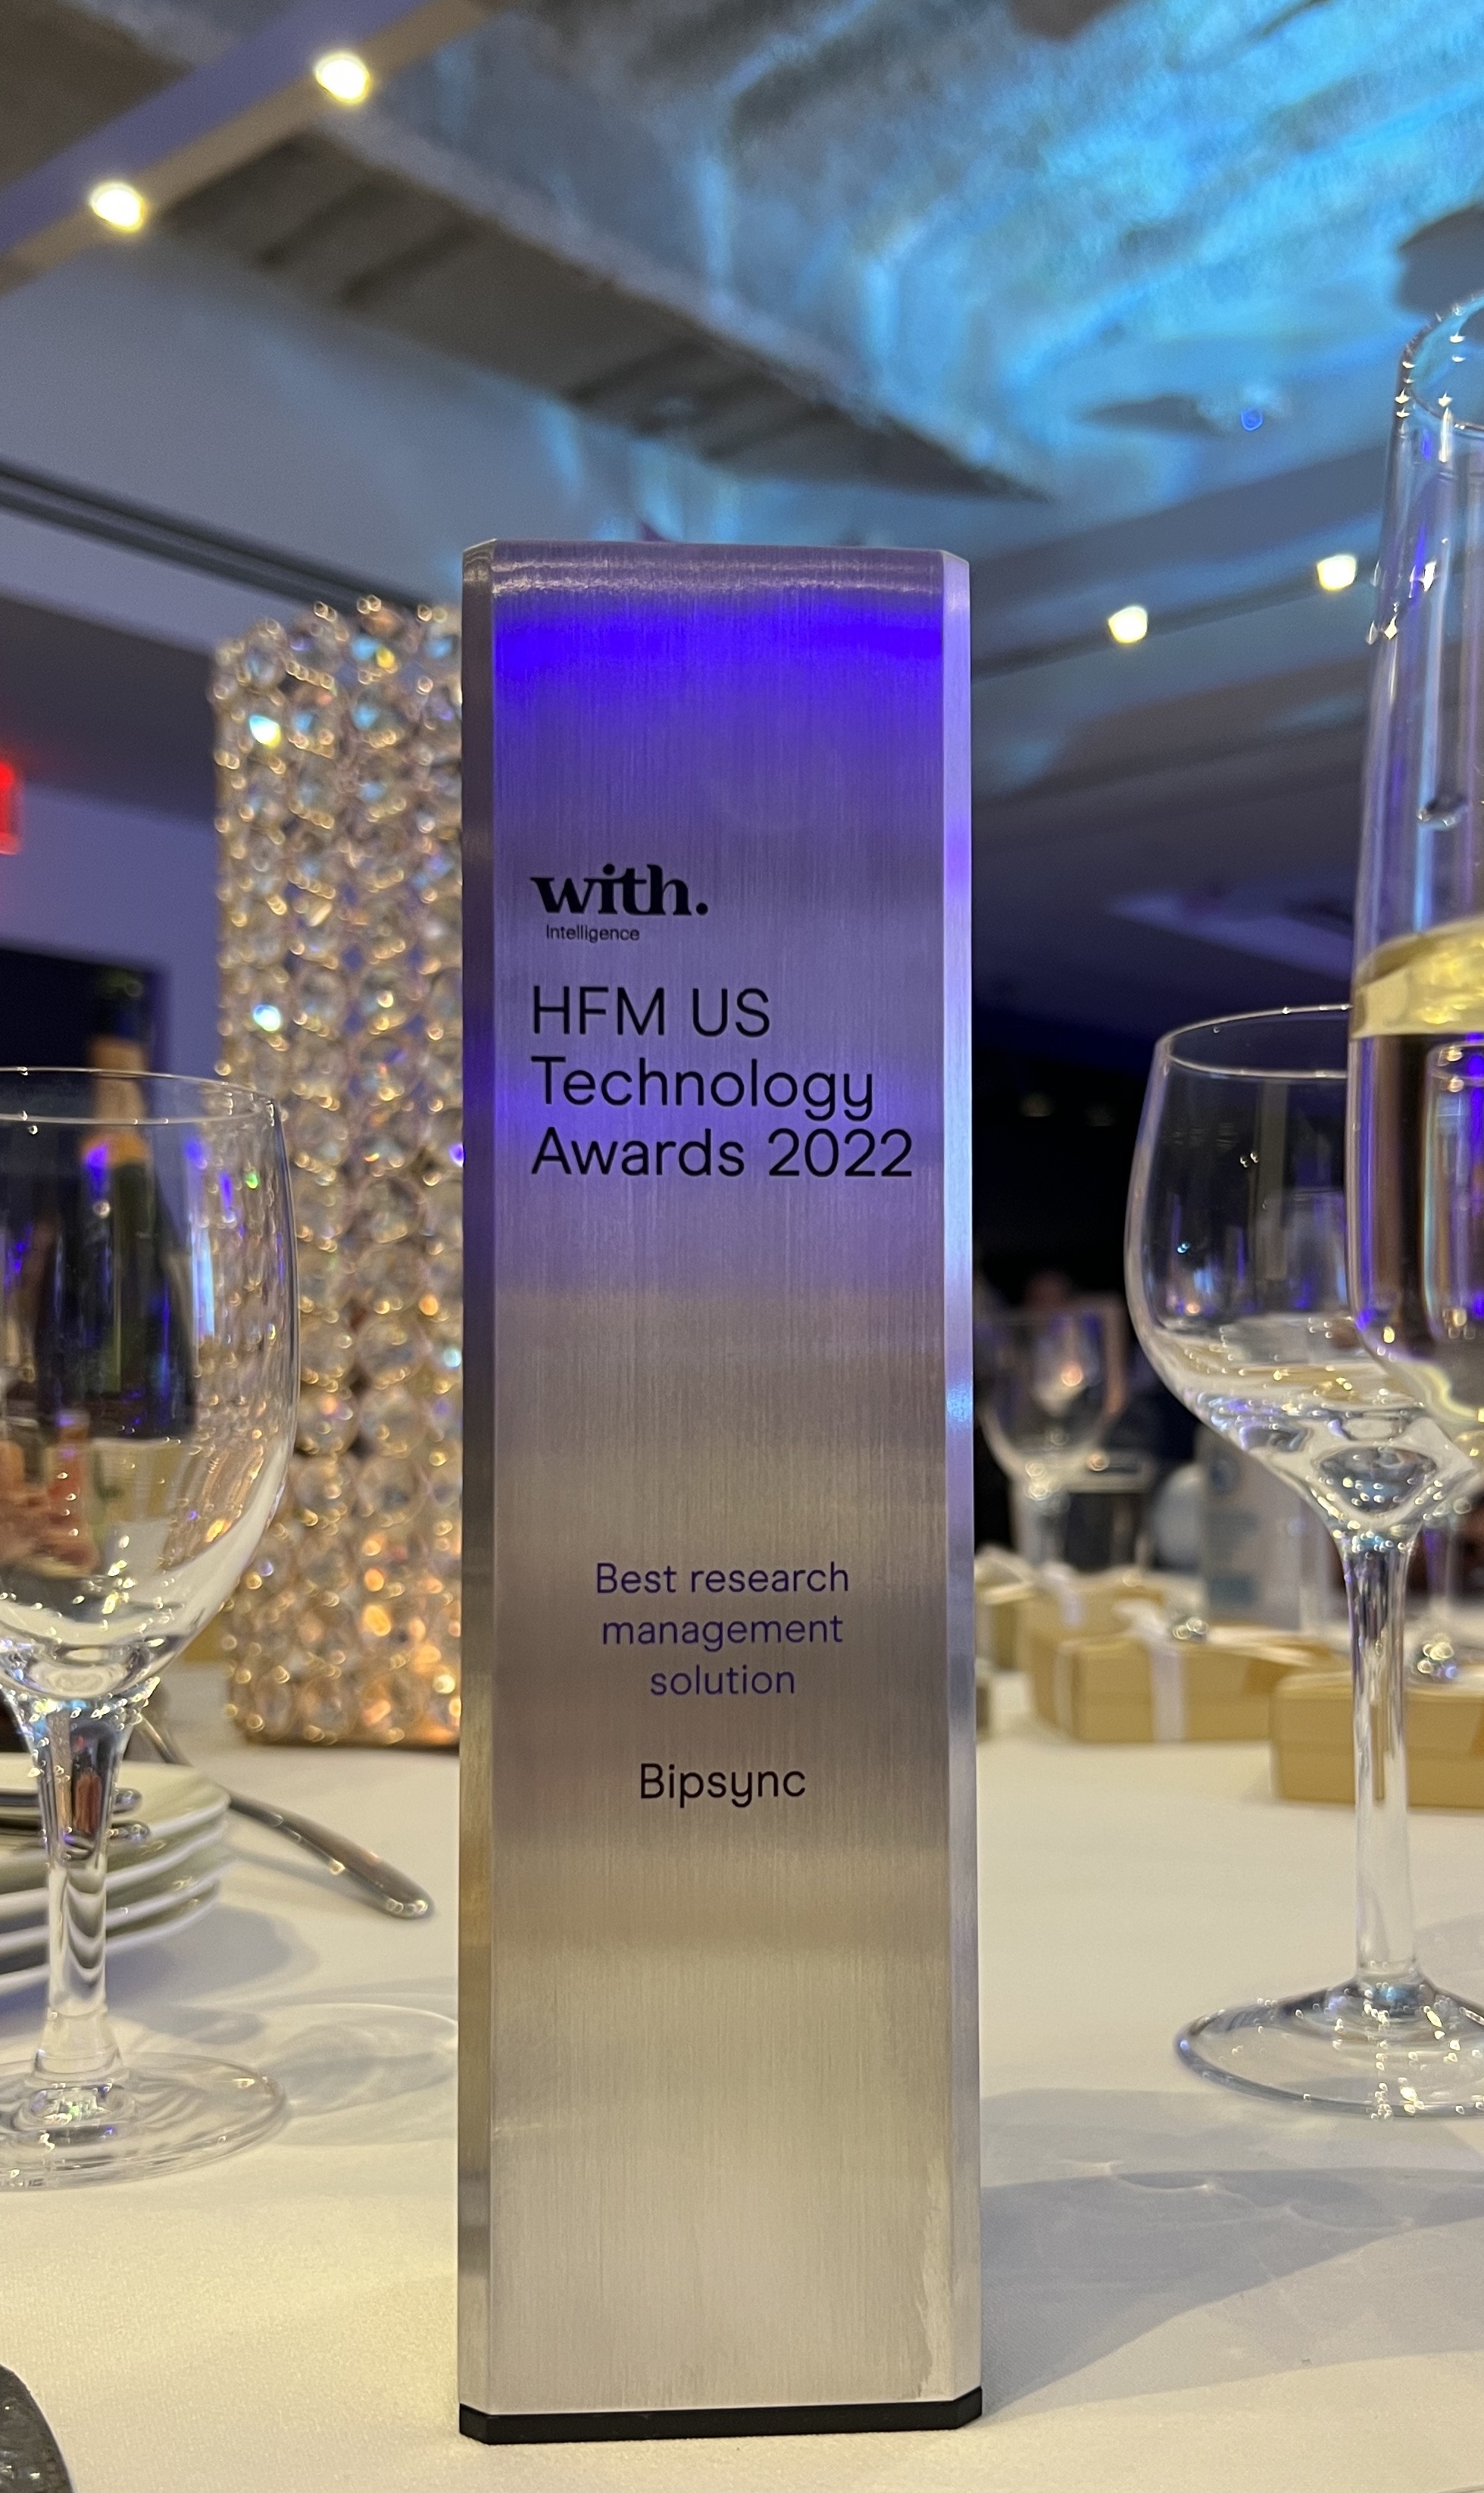 Bipsync is the 'Best Research Management Solution' According to With Intelligence HFM US Technology Awards 2022 thumbnail